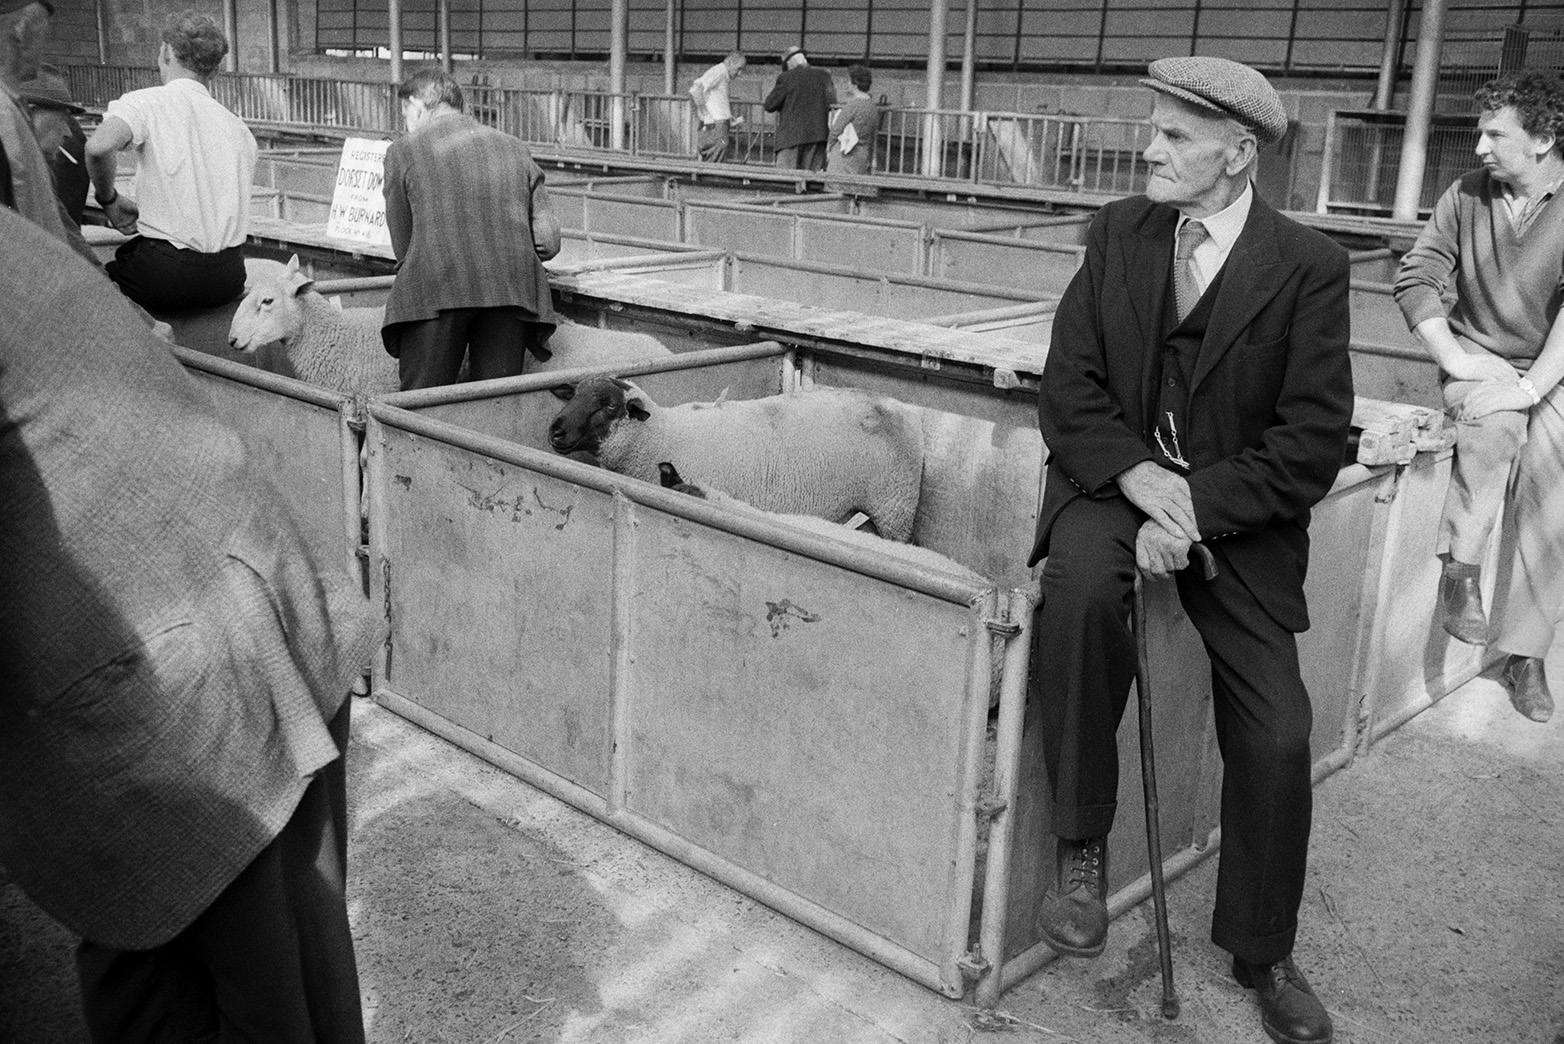 Men leaning on sheep pens at Hatherleigh Market. A man is the foreground is holding a walking stick.